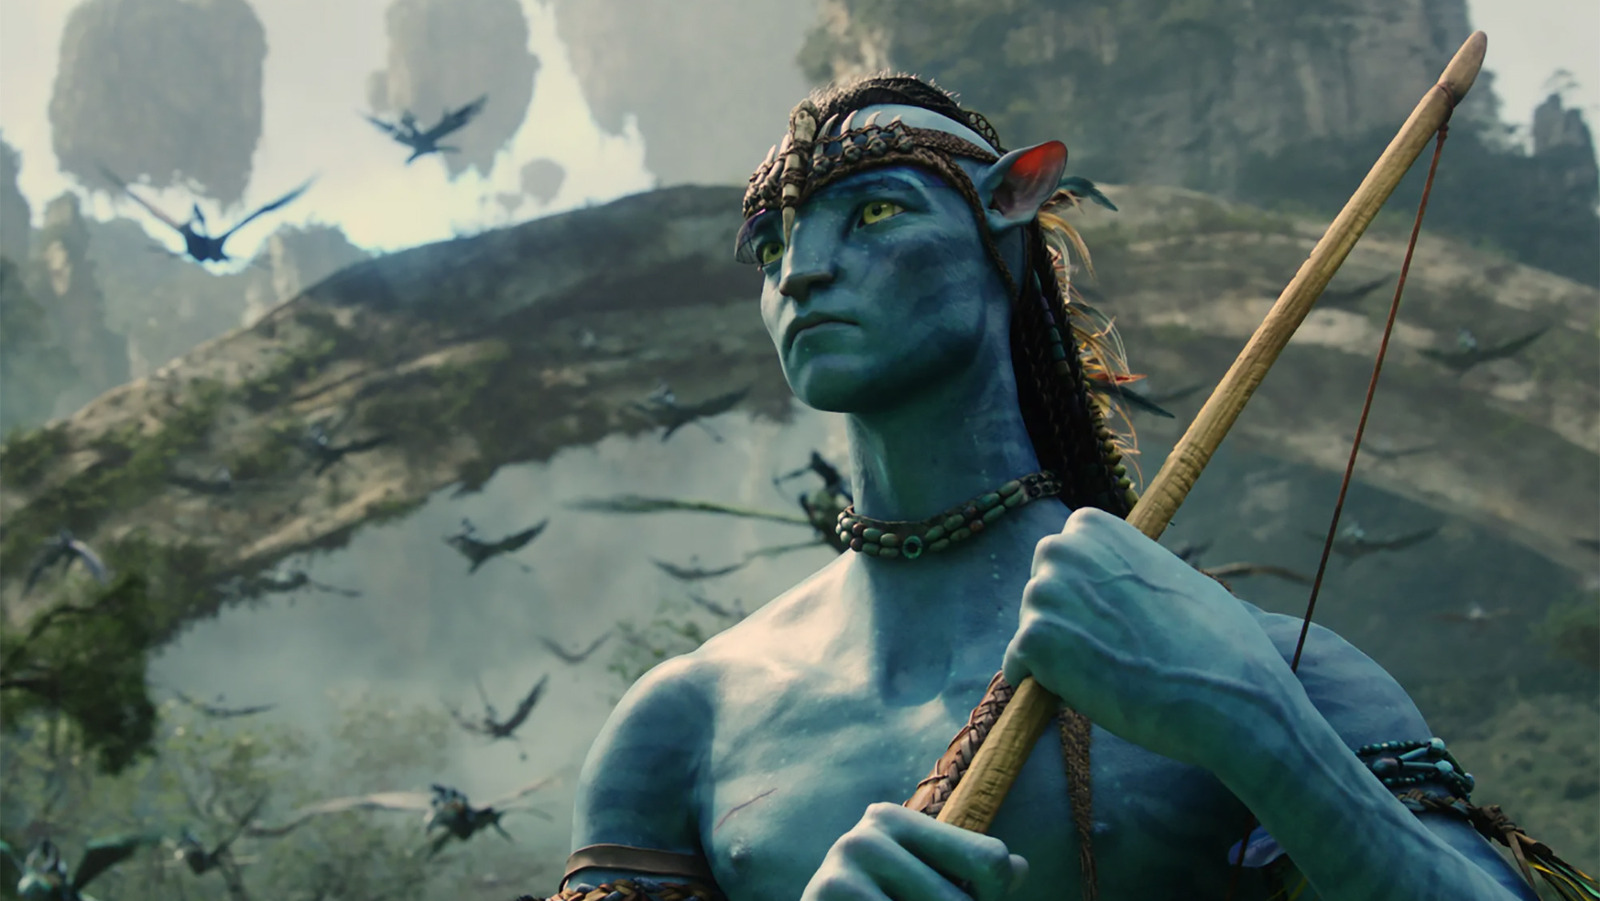 Avatar: The Way of Water filmmaker James Cameron may not direct